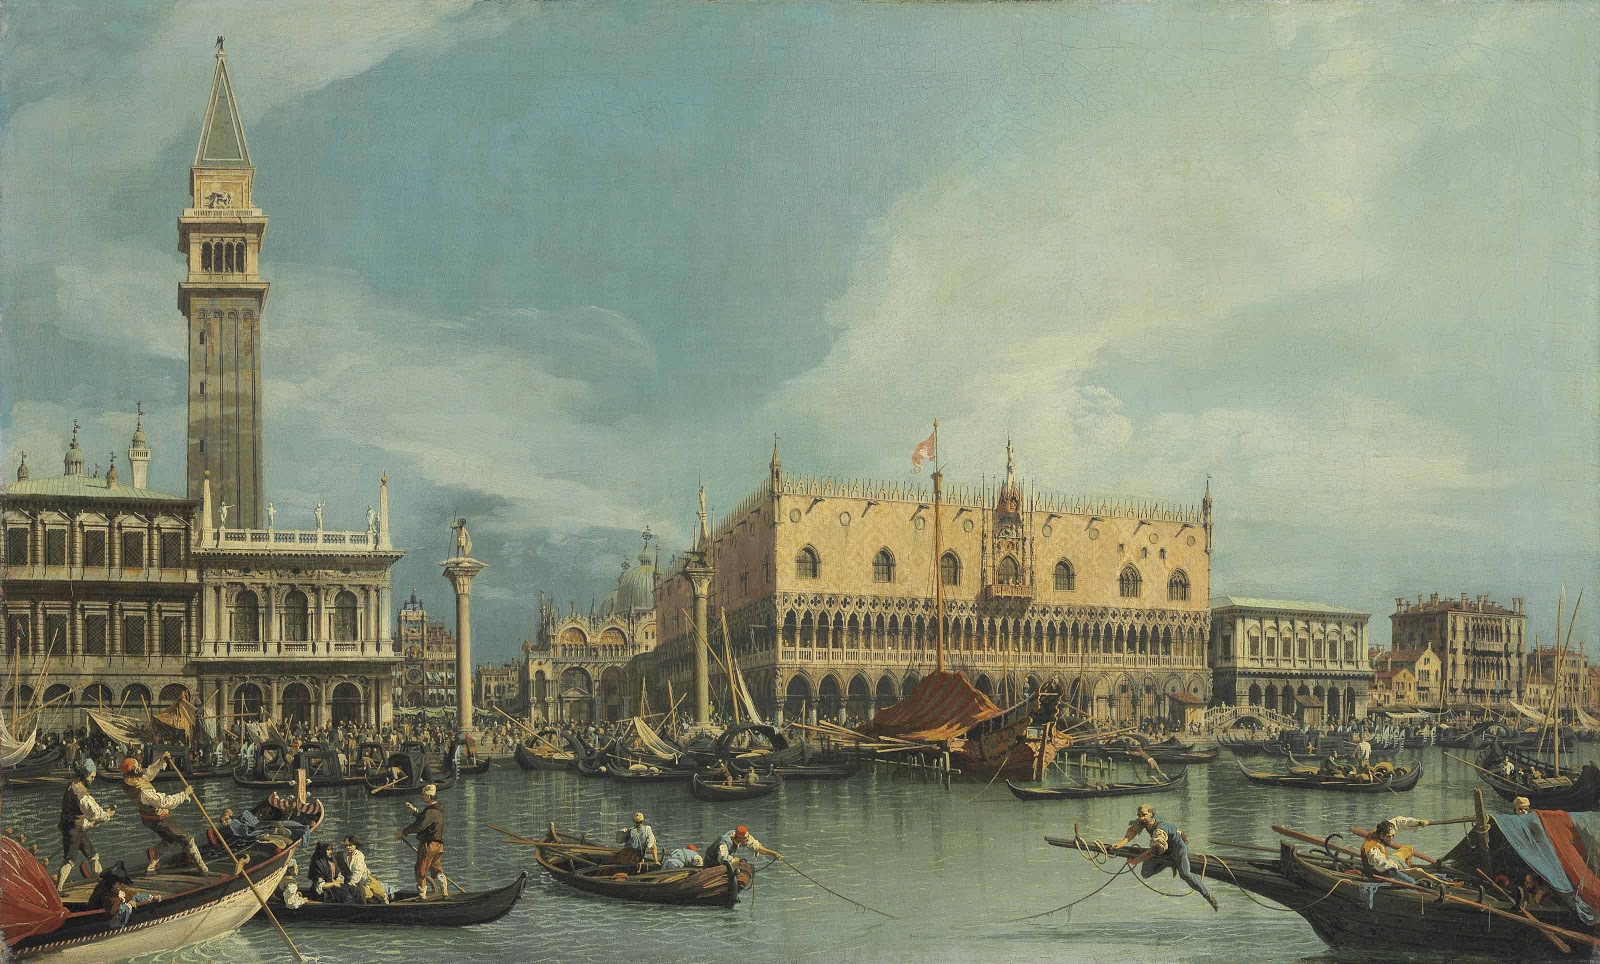 Canaletto-1697-1768 (39).jpg